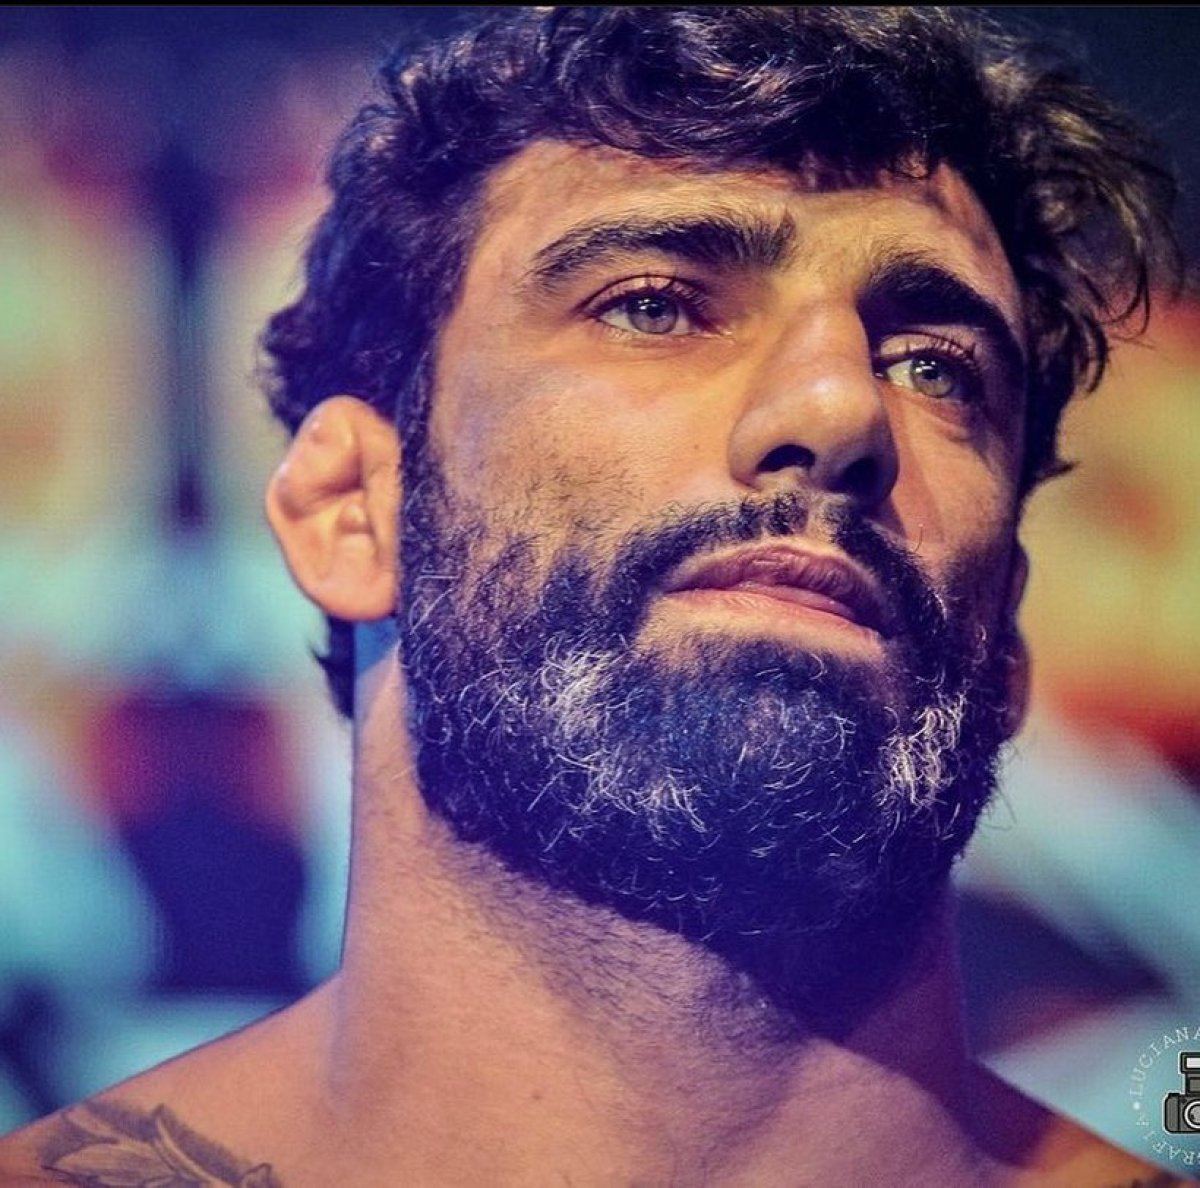 World champion Leandro Lo killed by police #3